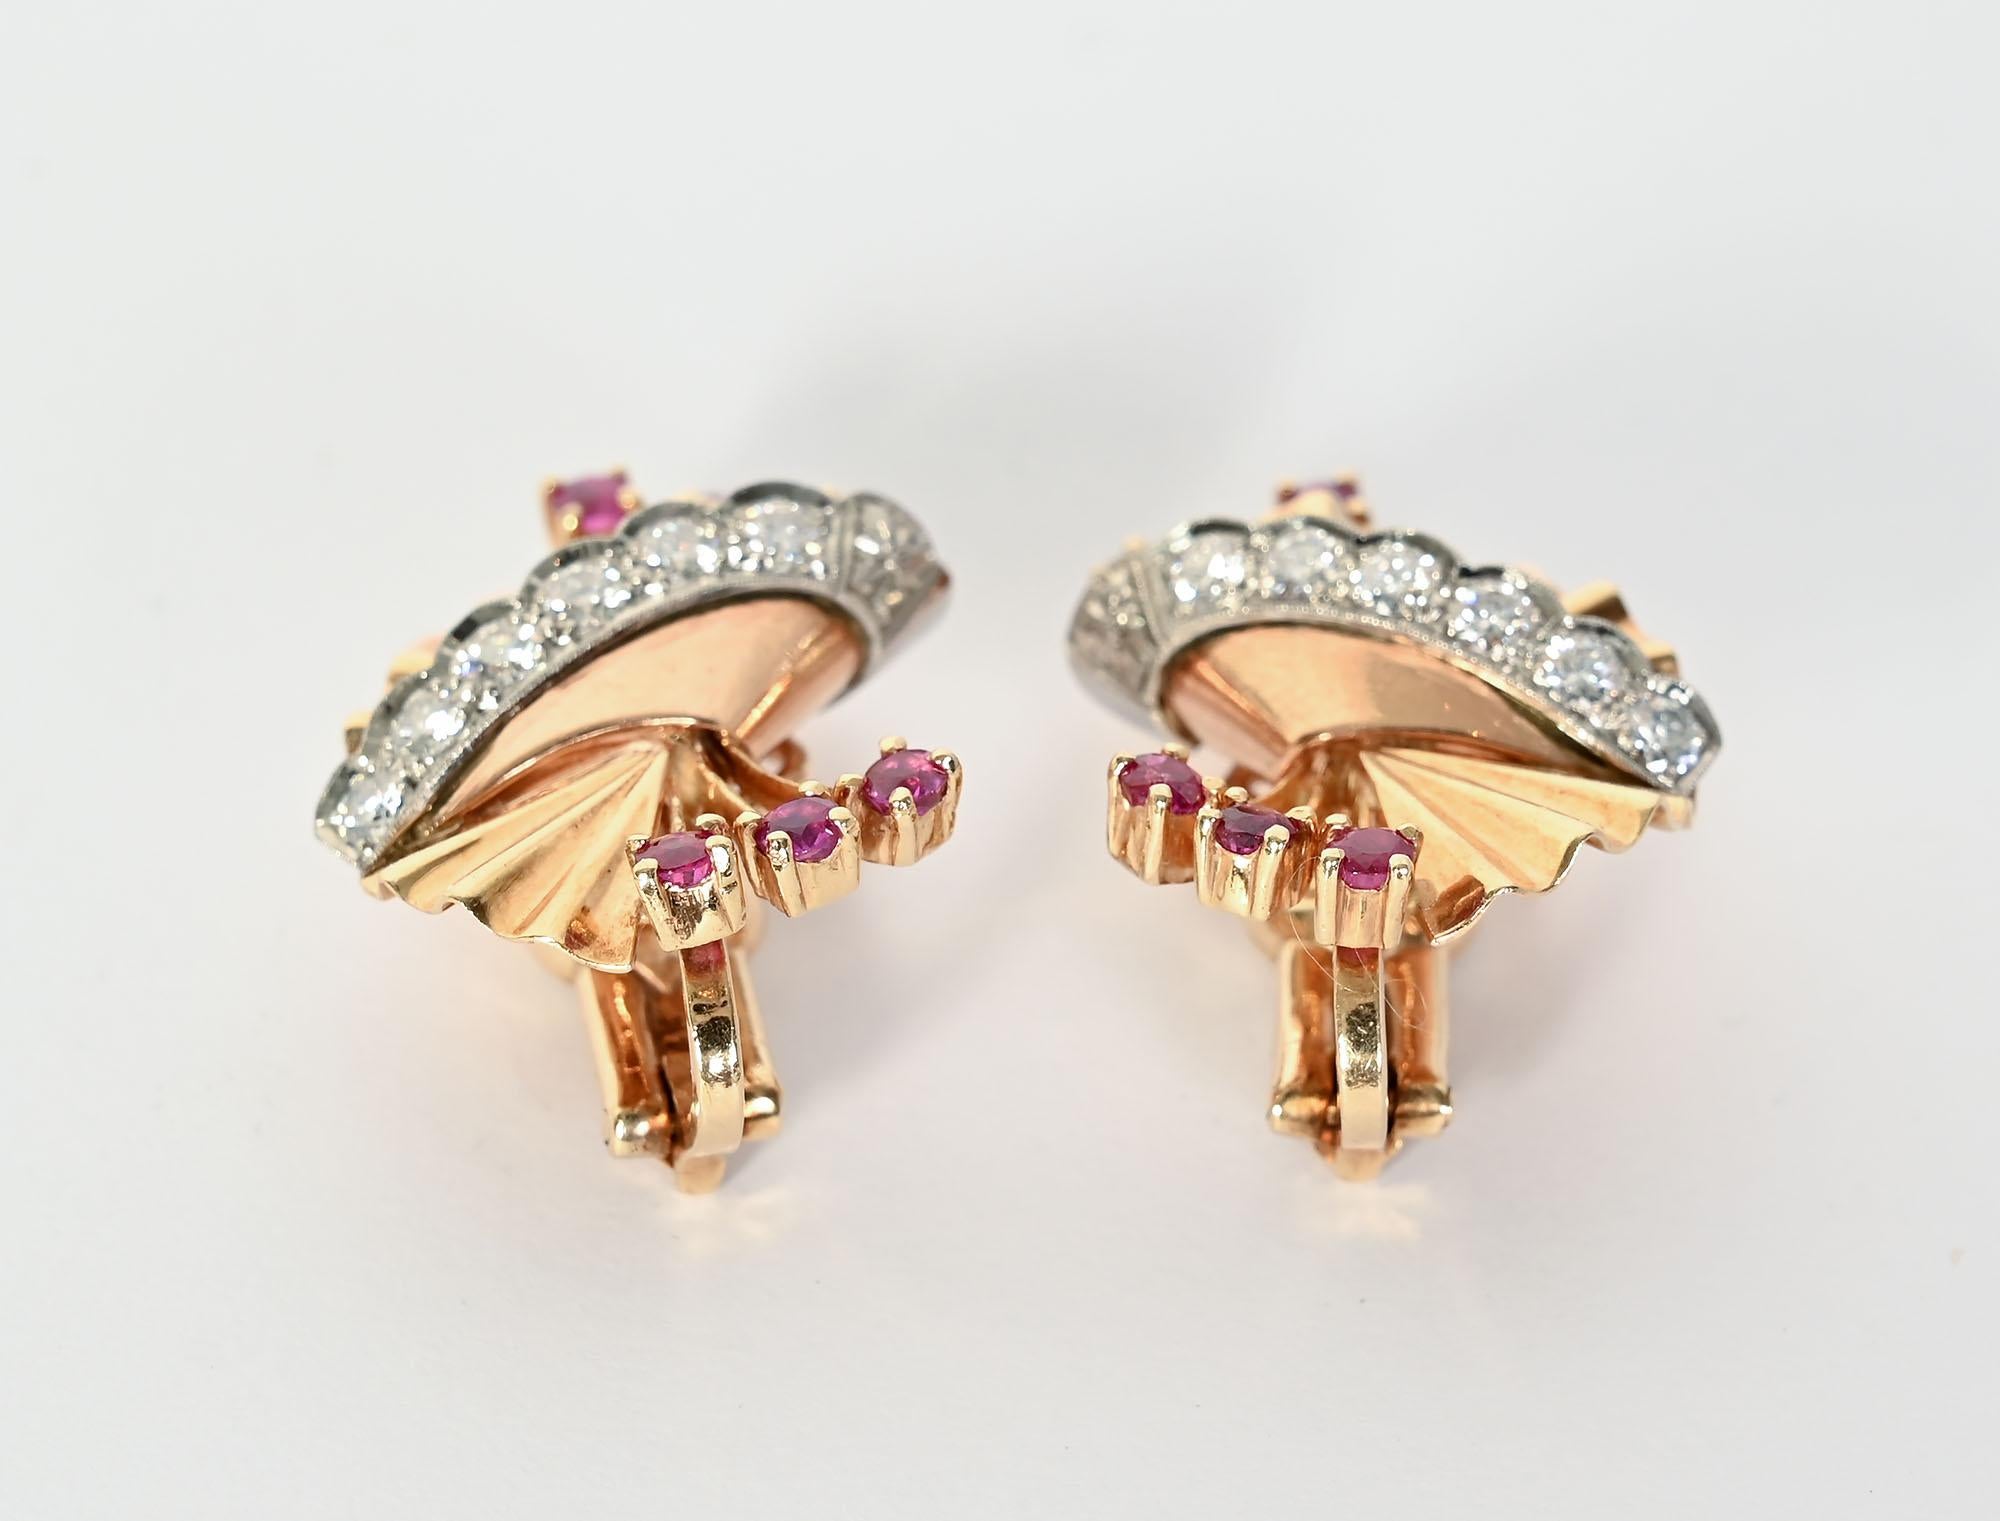 Women's or Men's Retro Gold Earrings with Rubies and Diamonds